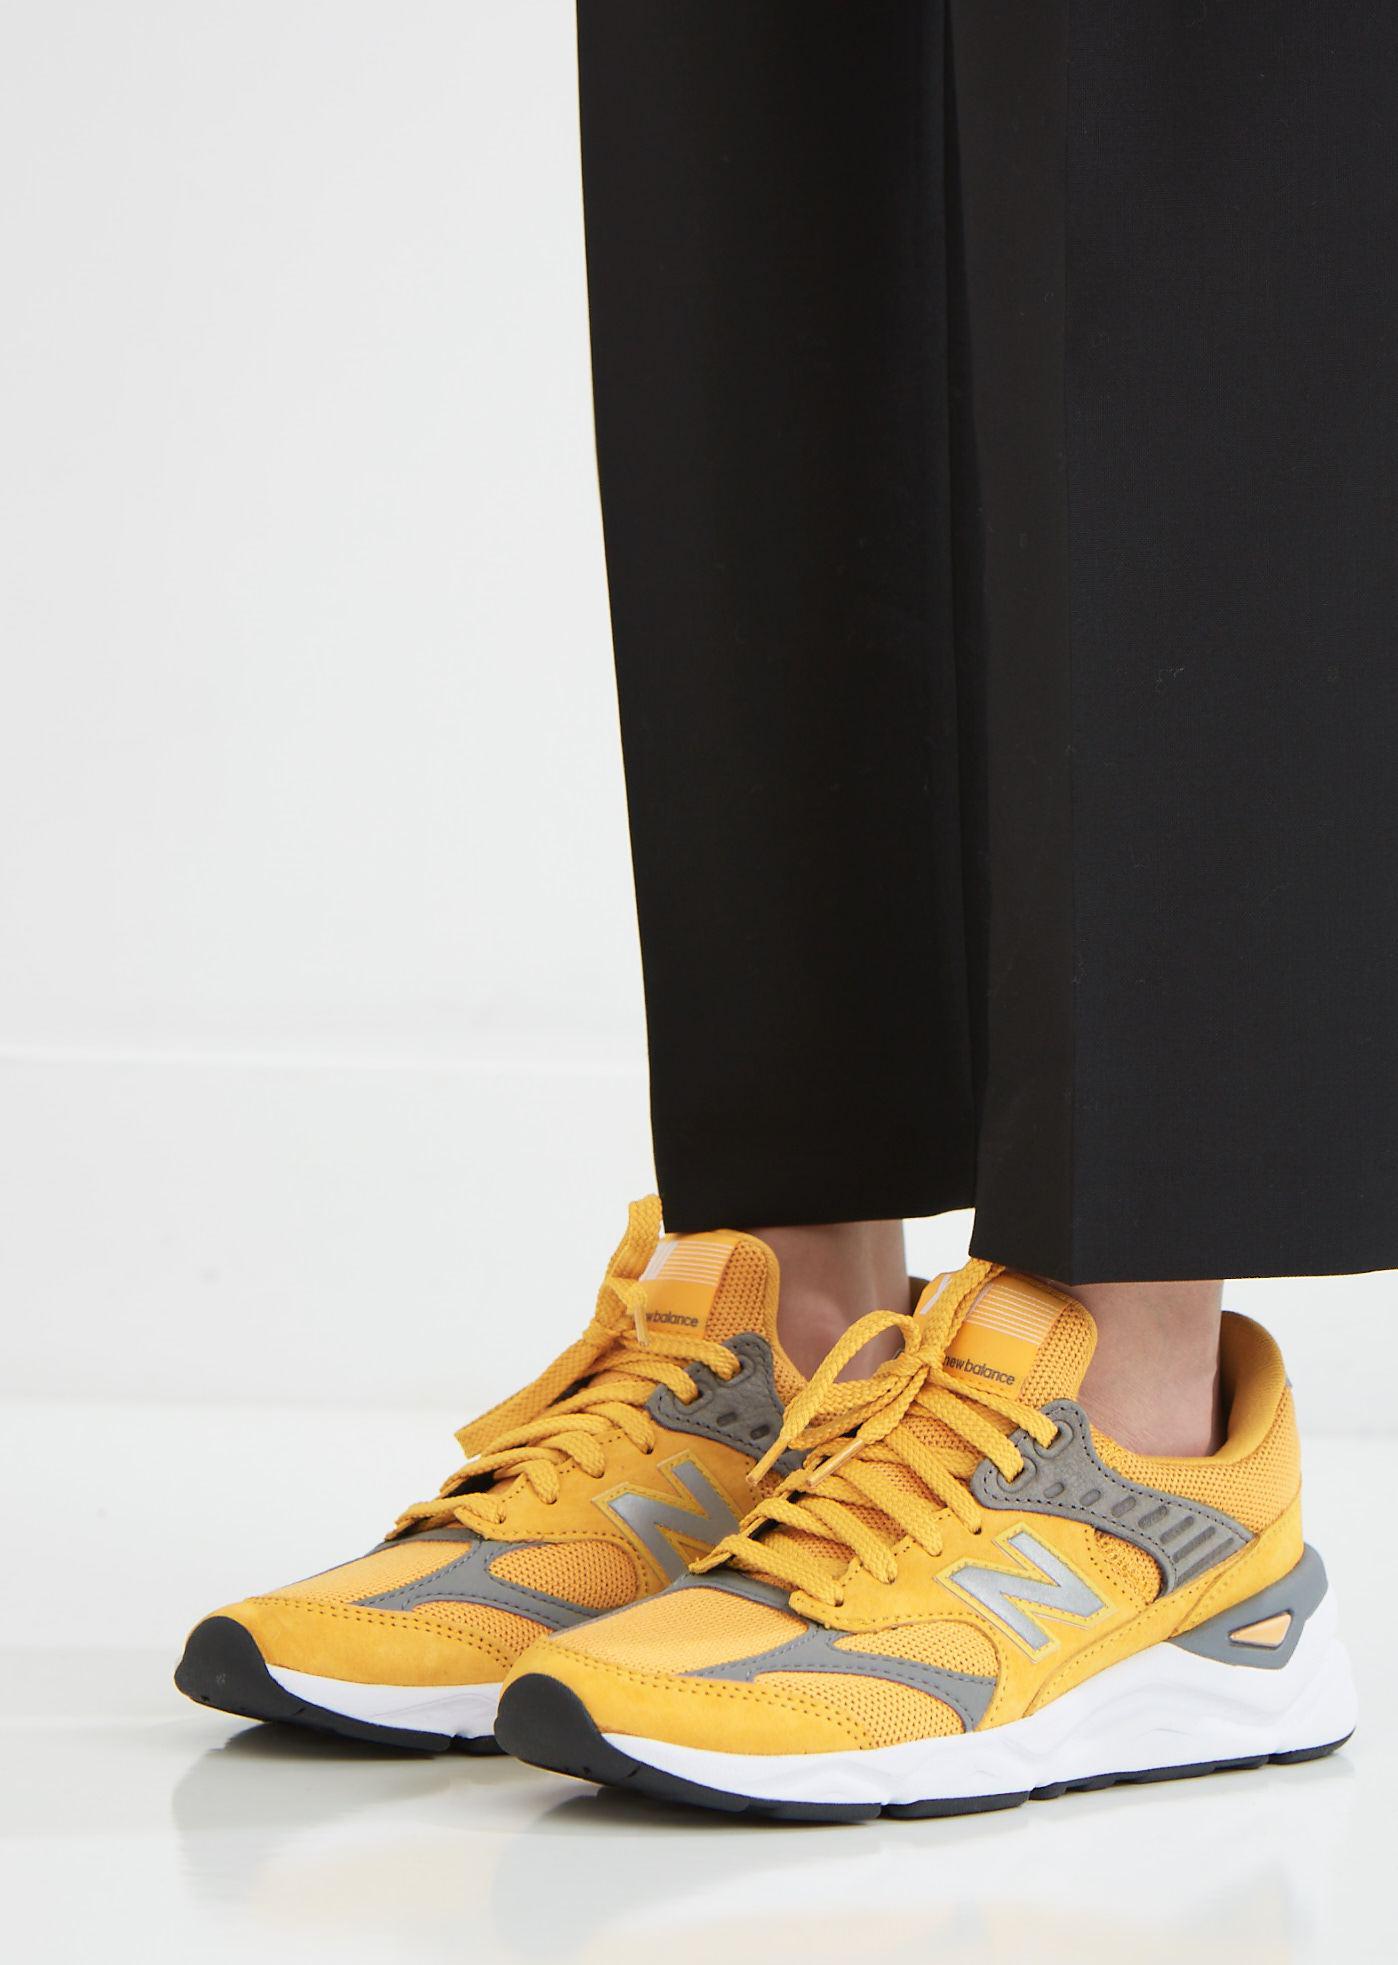 New Balance Rubber X90 Reconstructed Sneakers in Yellow